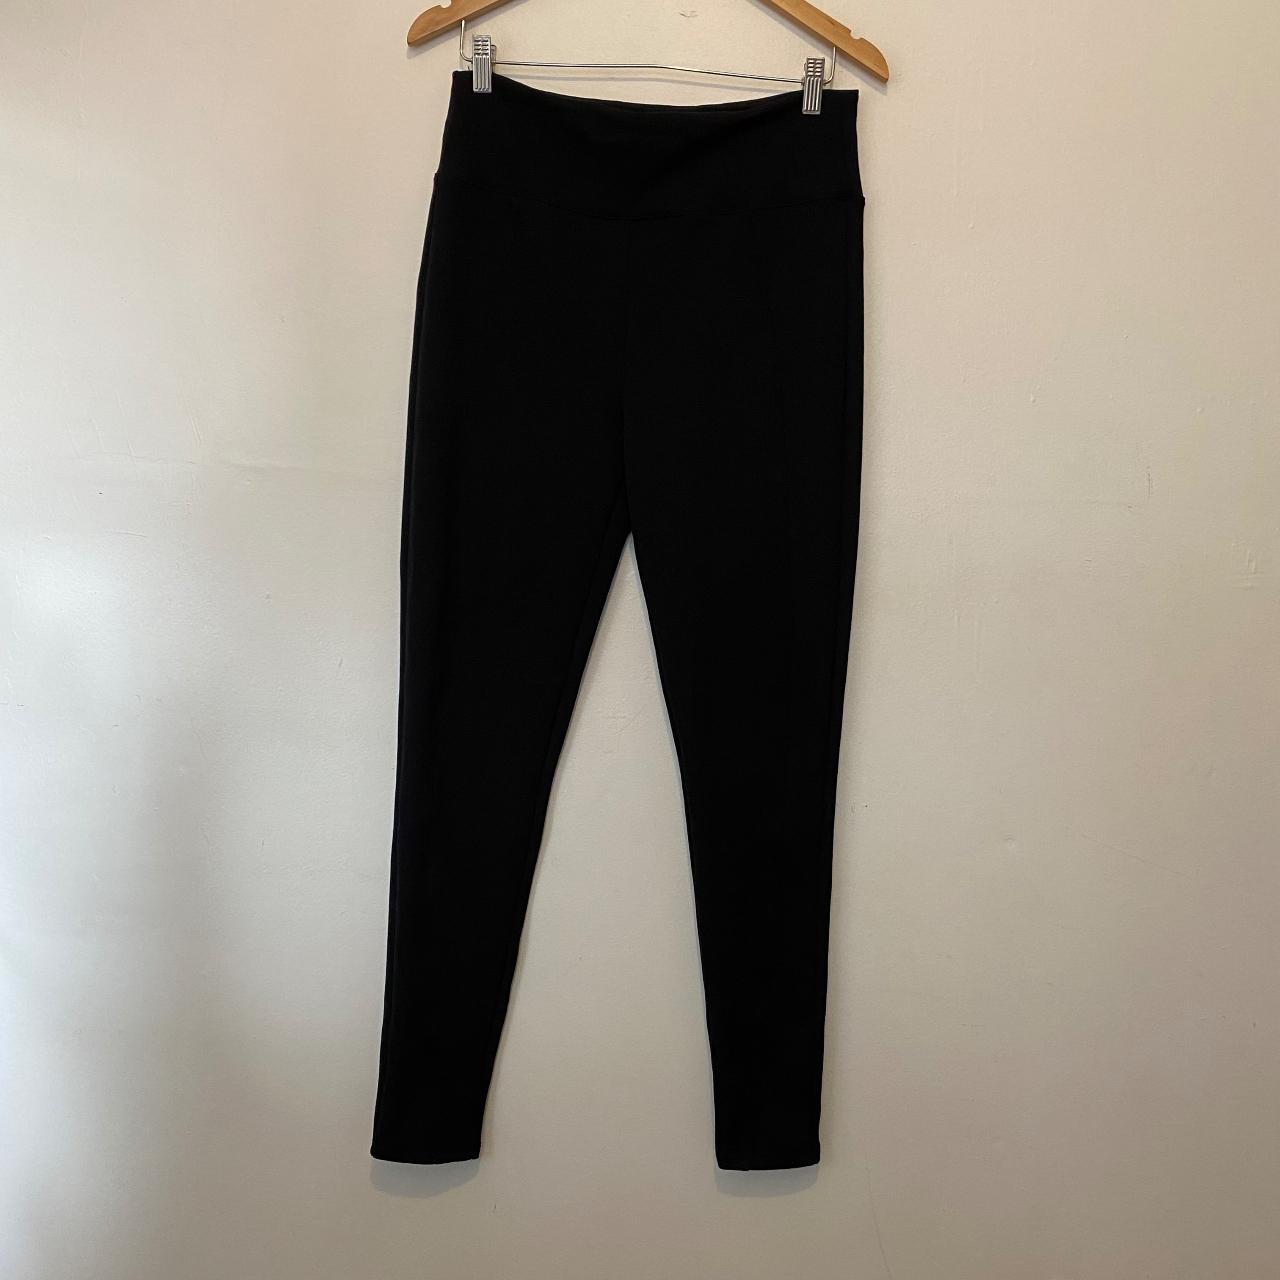 Spanx ASSETS by Womens Black Shaping Leggings Size Large